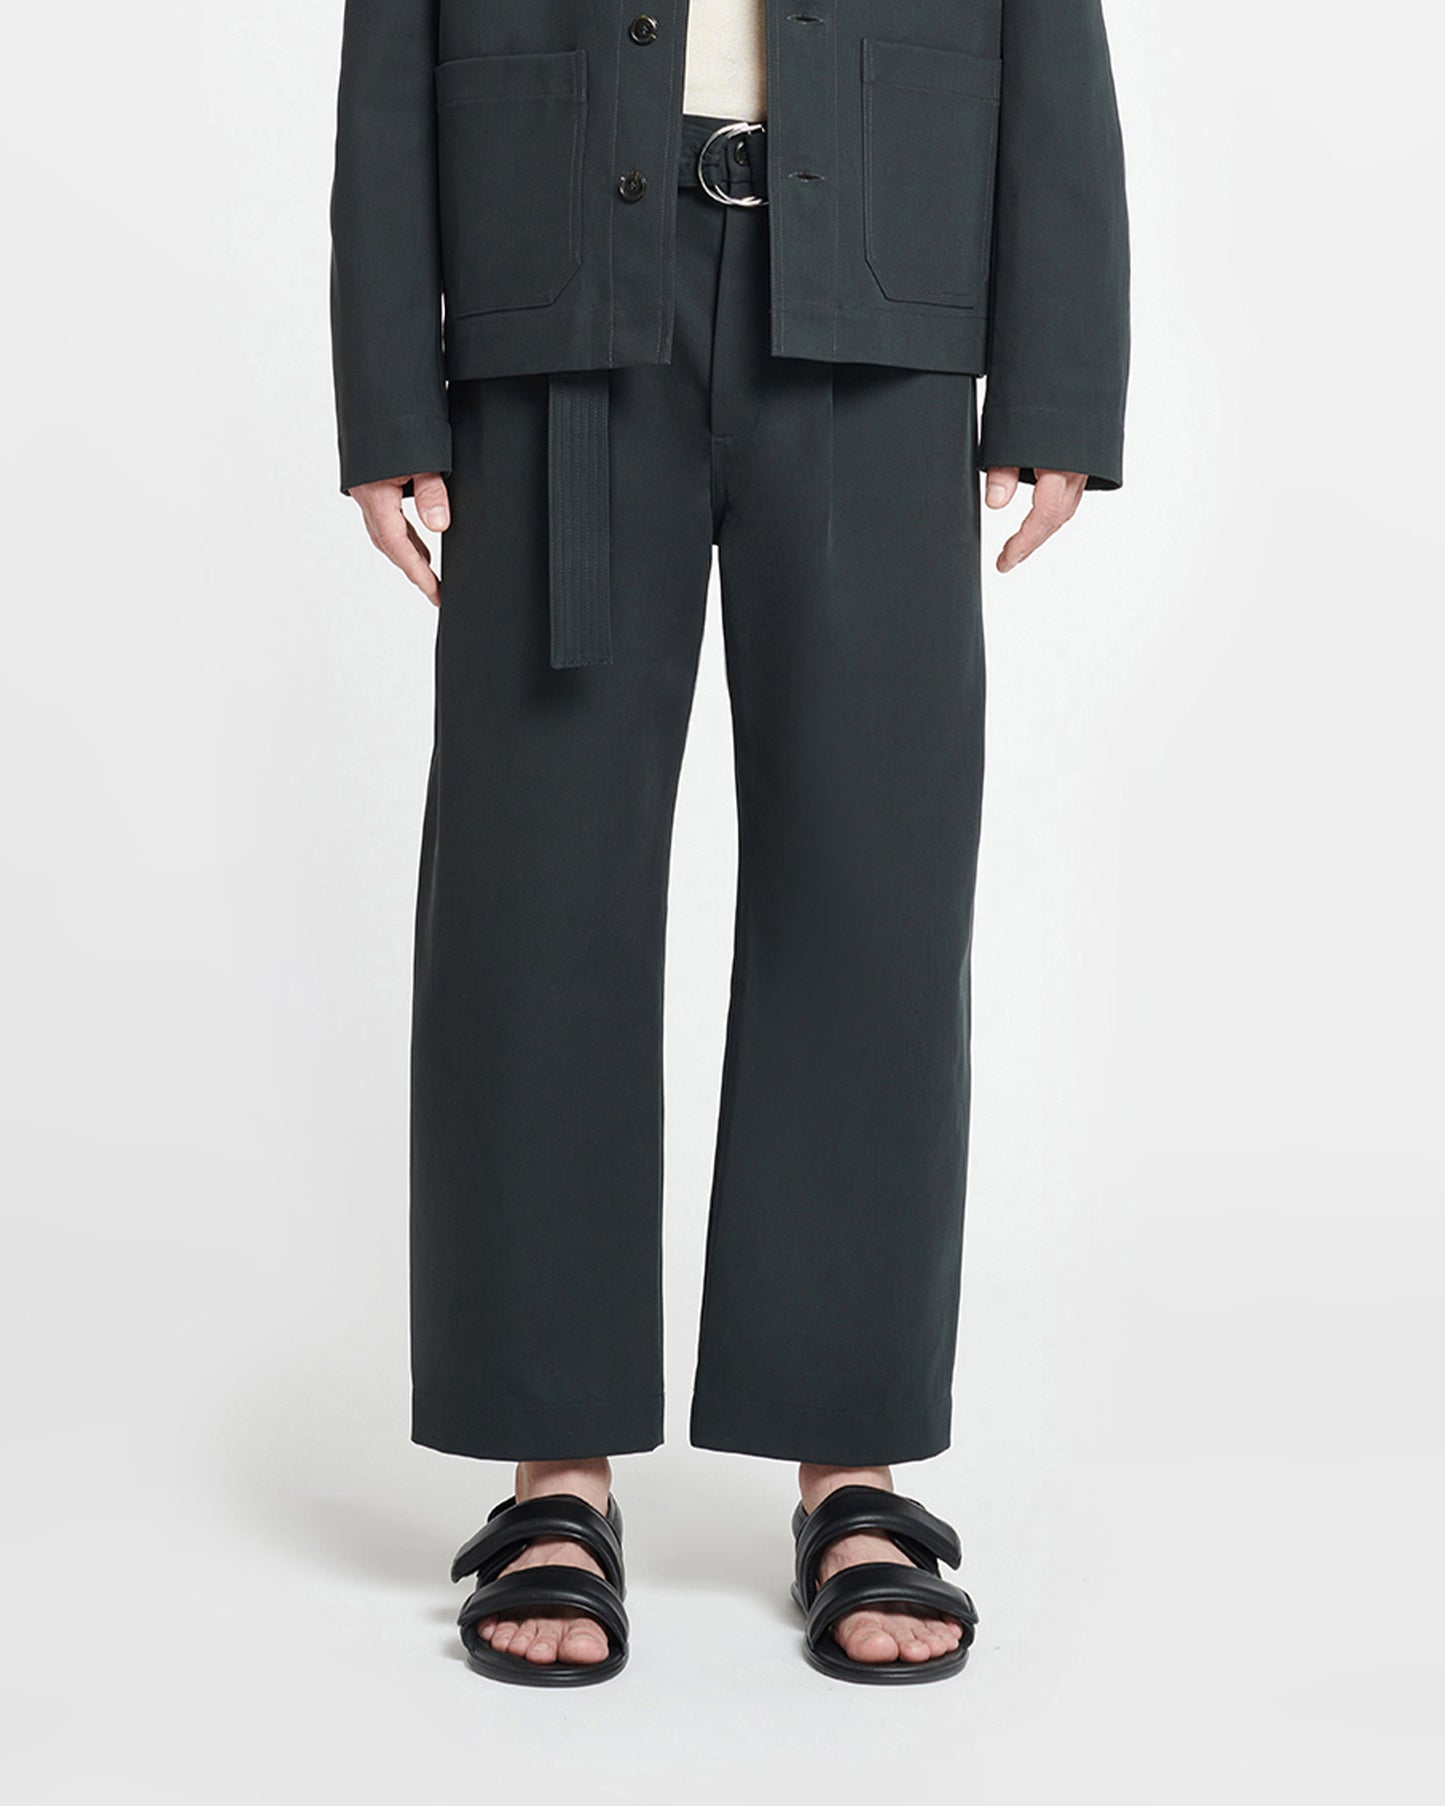 Ferre - Belted Structured Twill Pants - Anthracite